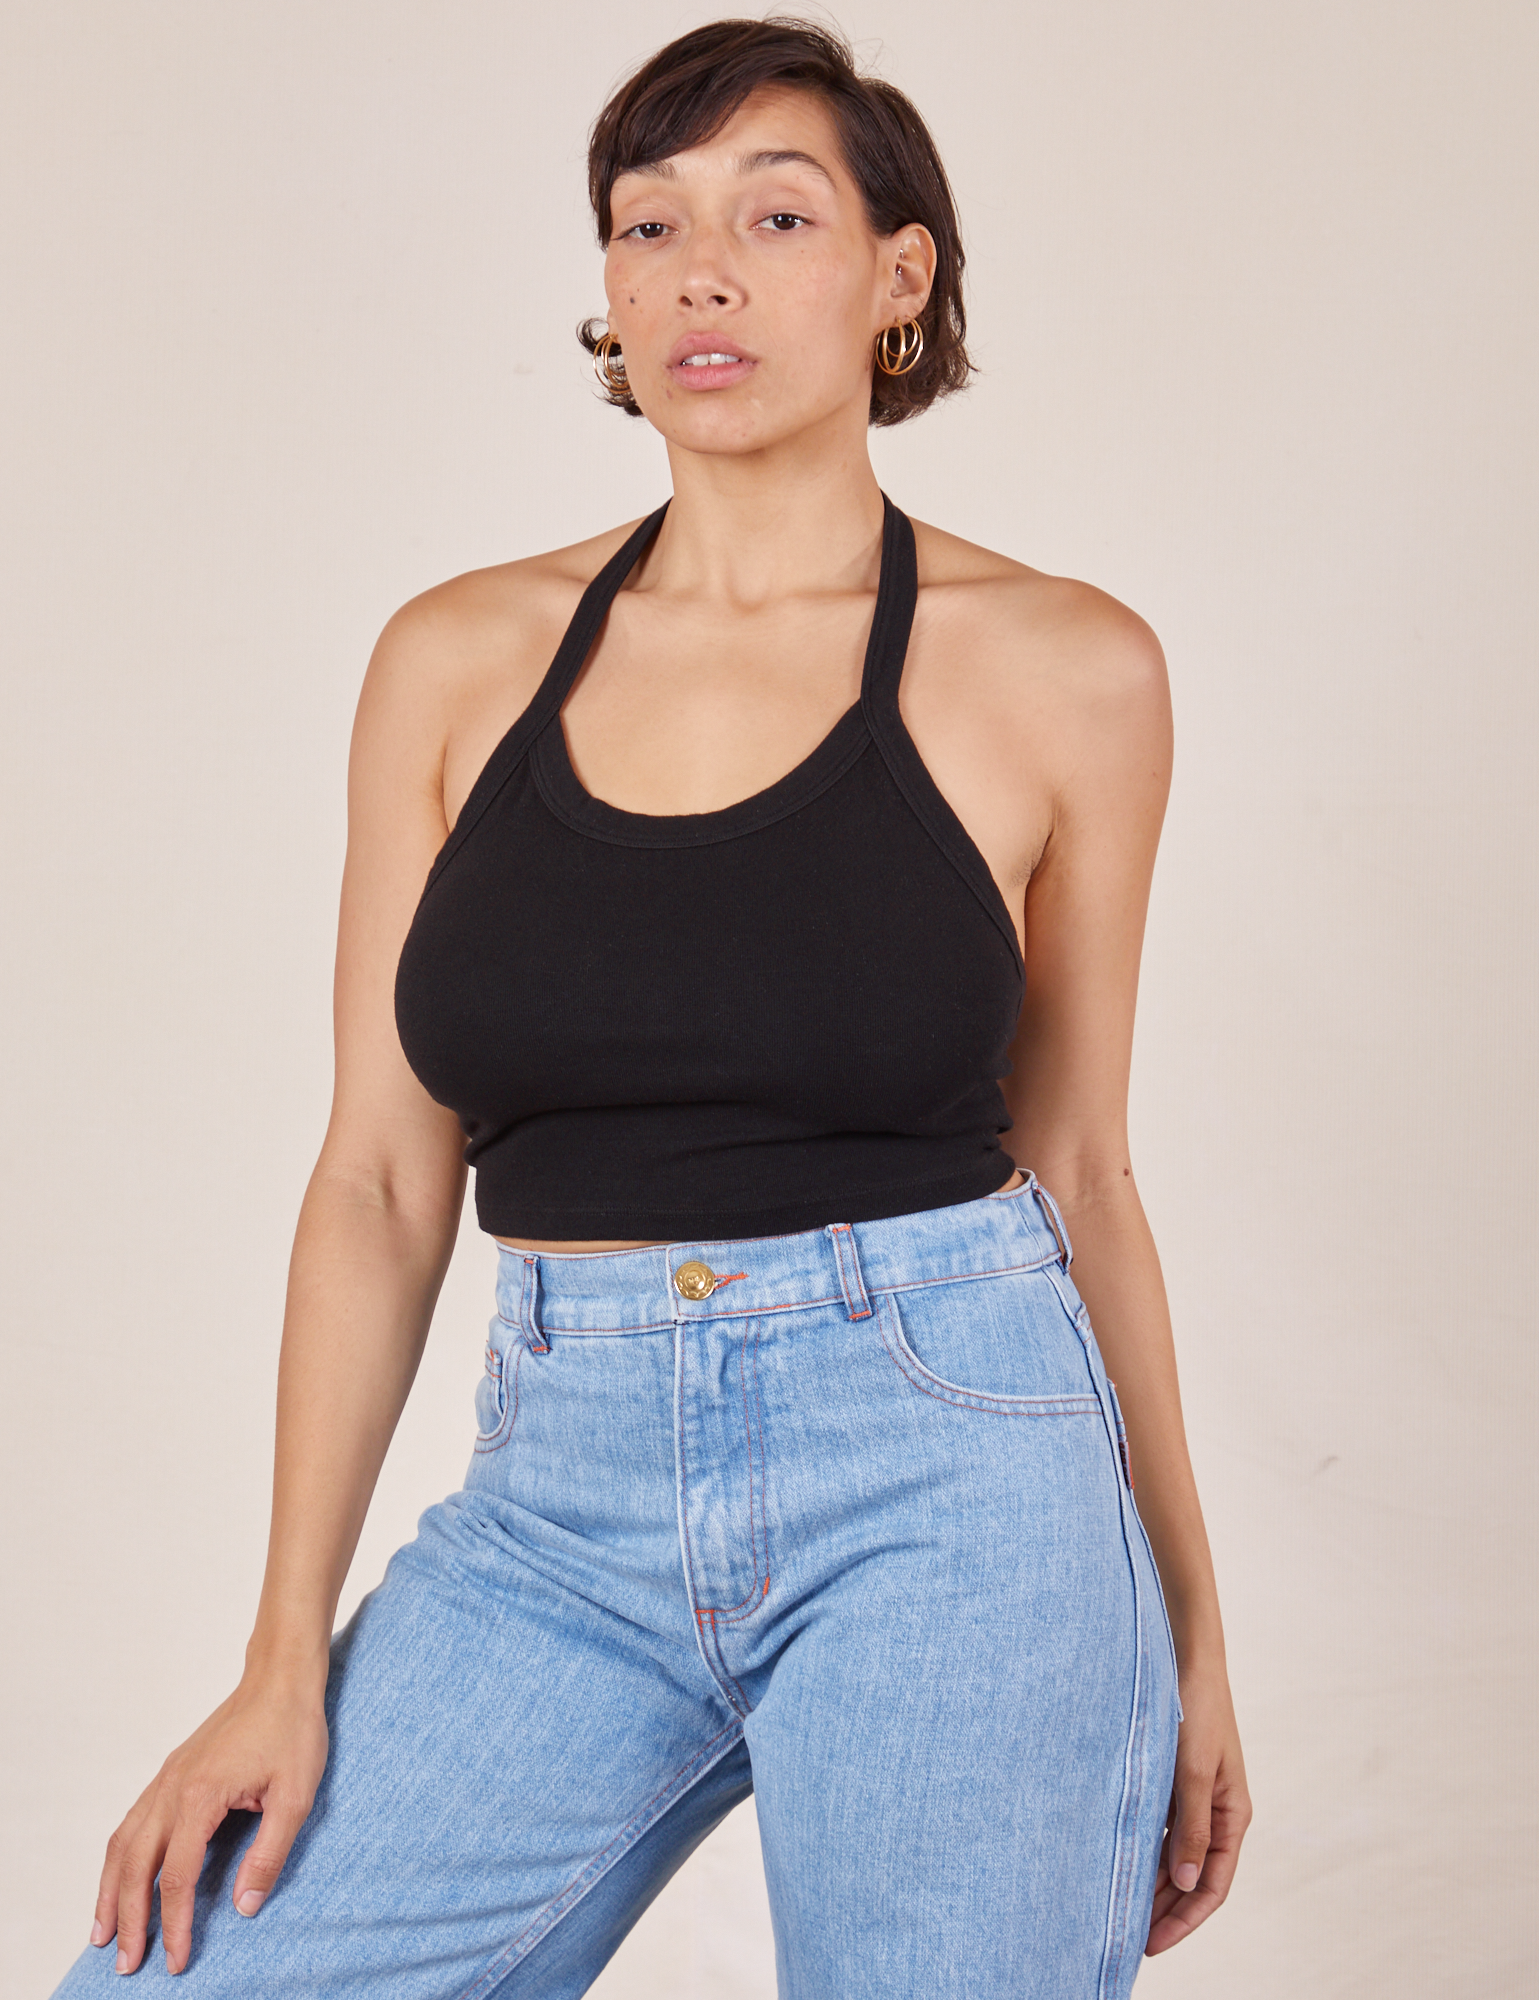 Tiara is 5&#39;4&quot; and wearing XS Halter Top in Basic Black paired with light wash Sailor Jeans